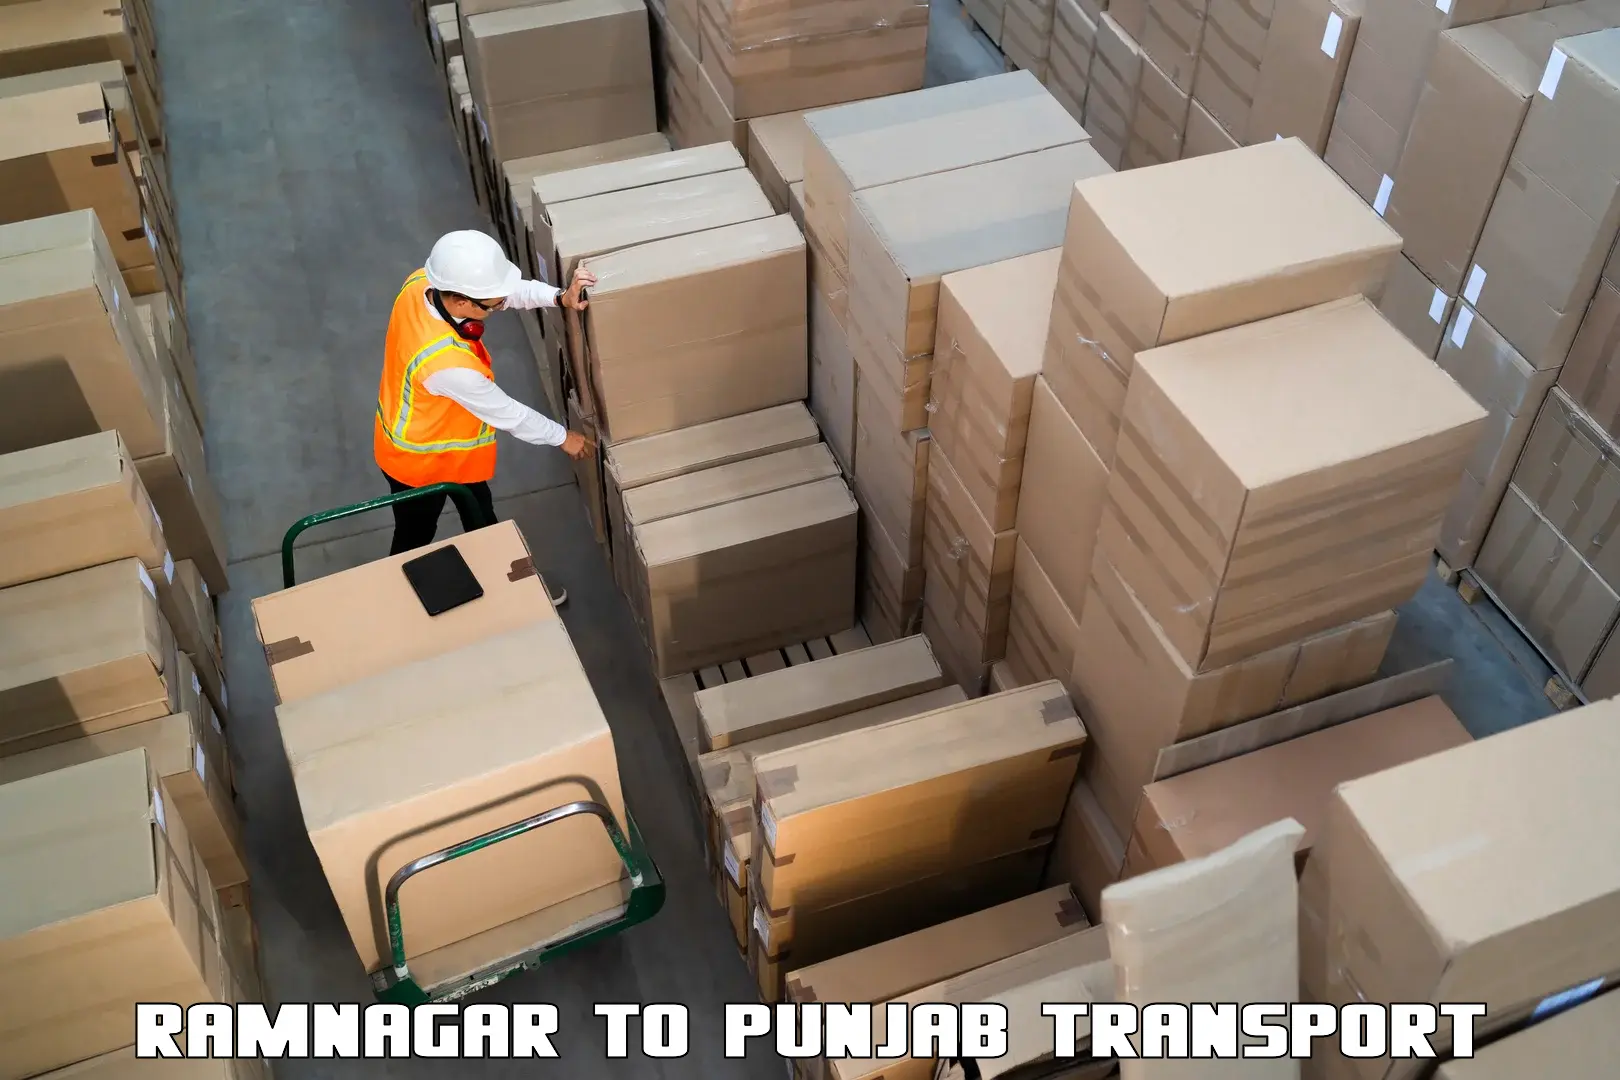 Daily parcel service transport Ramnagar to Sultanpur Lodhi